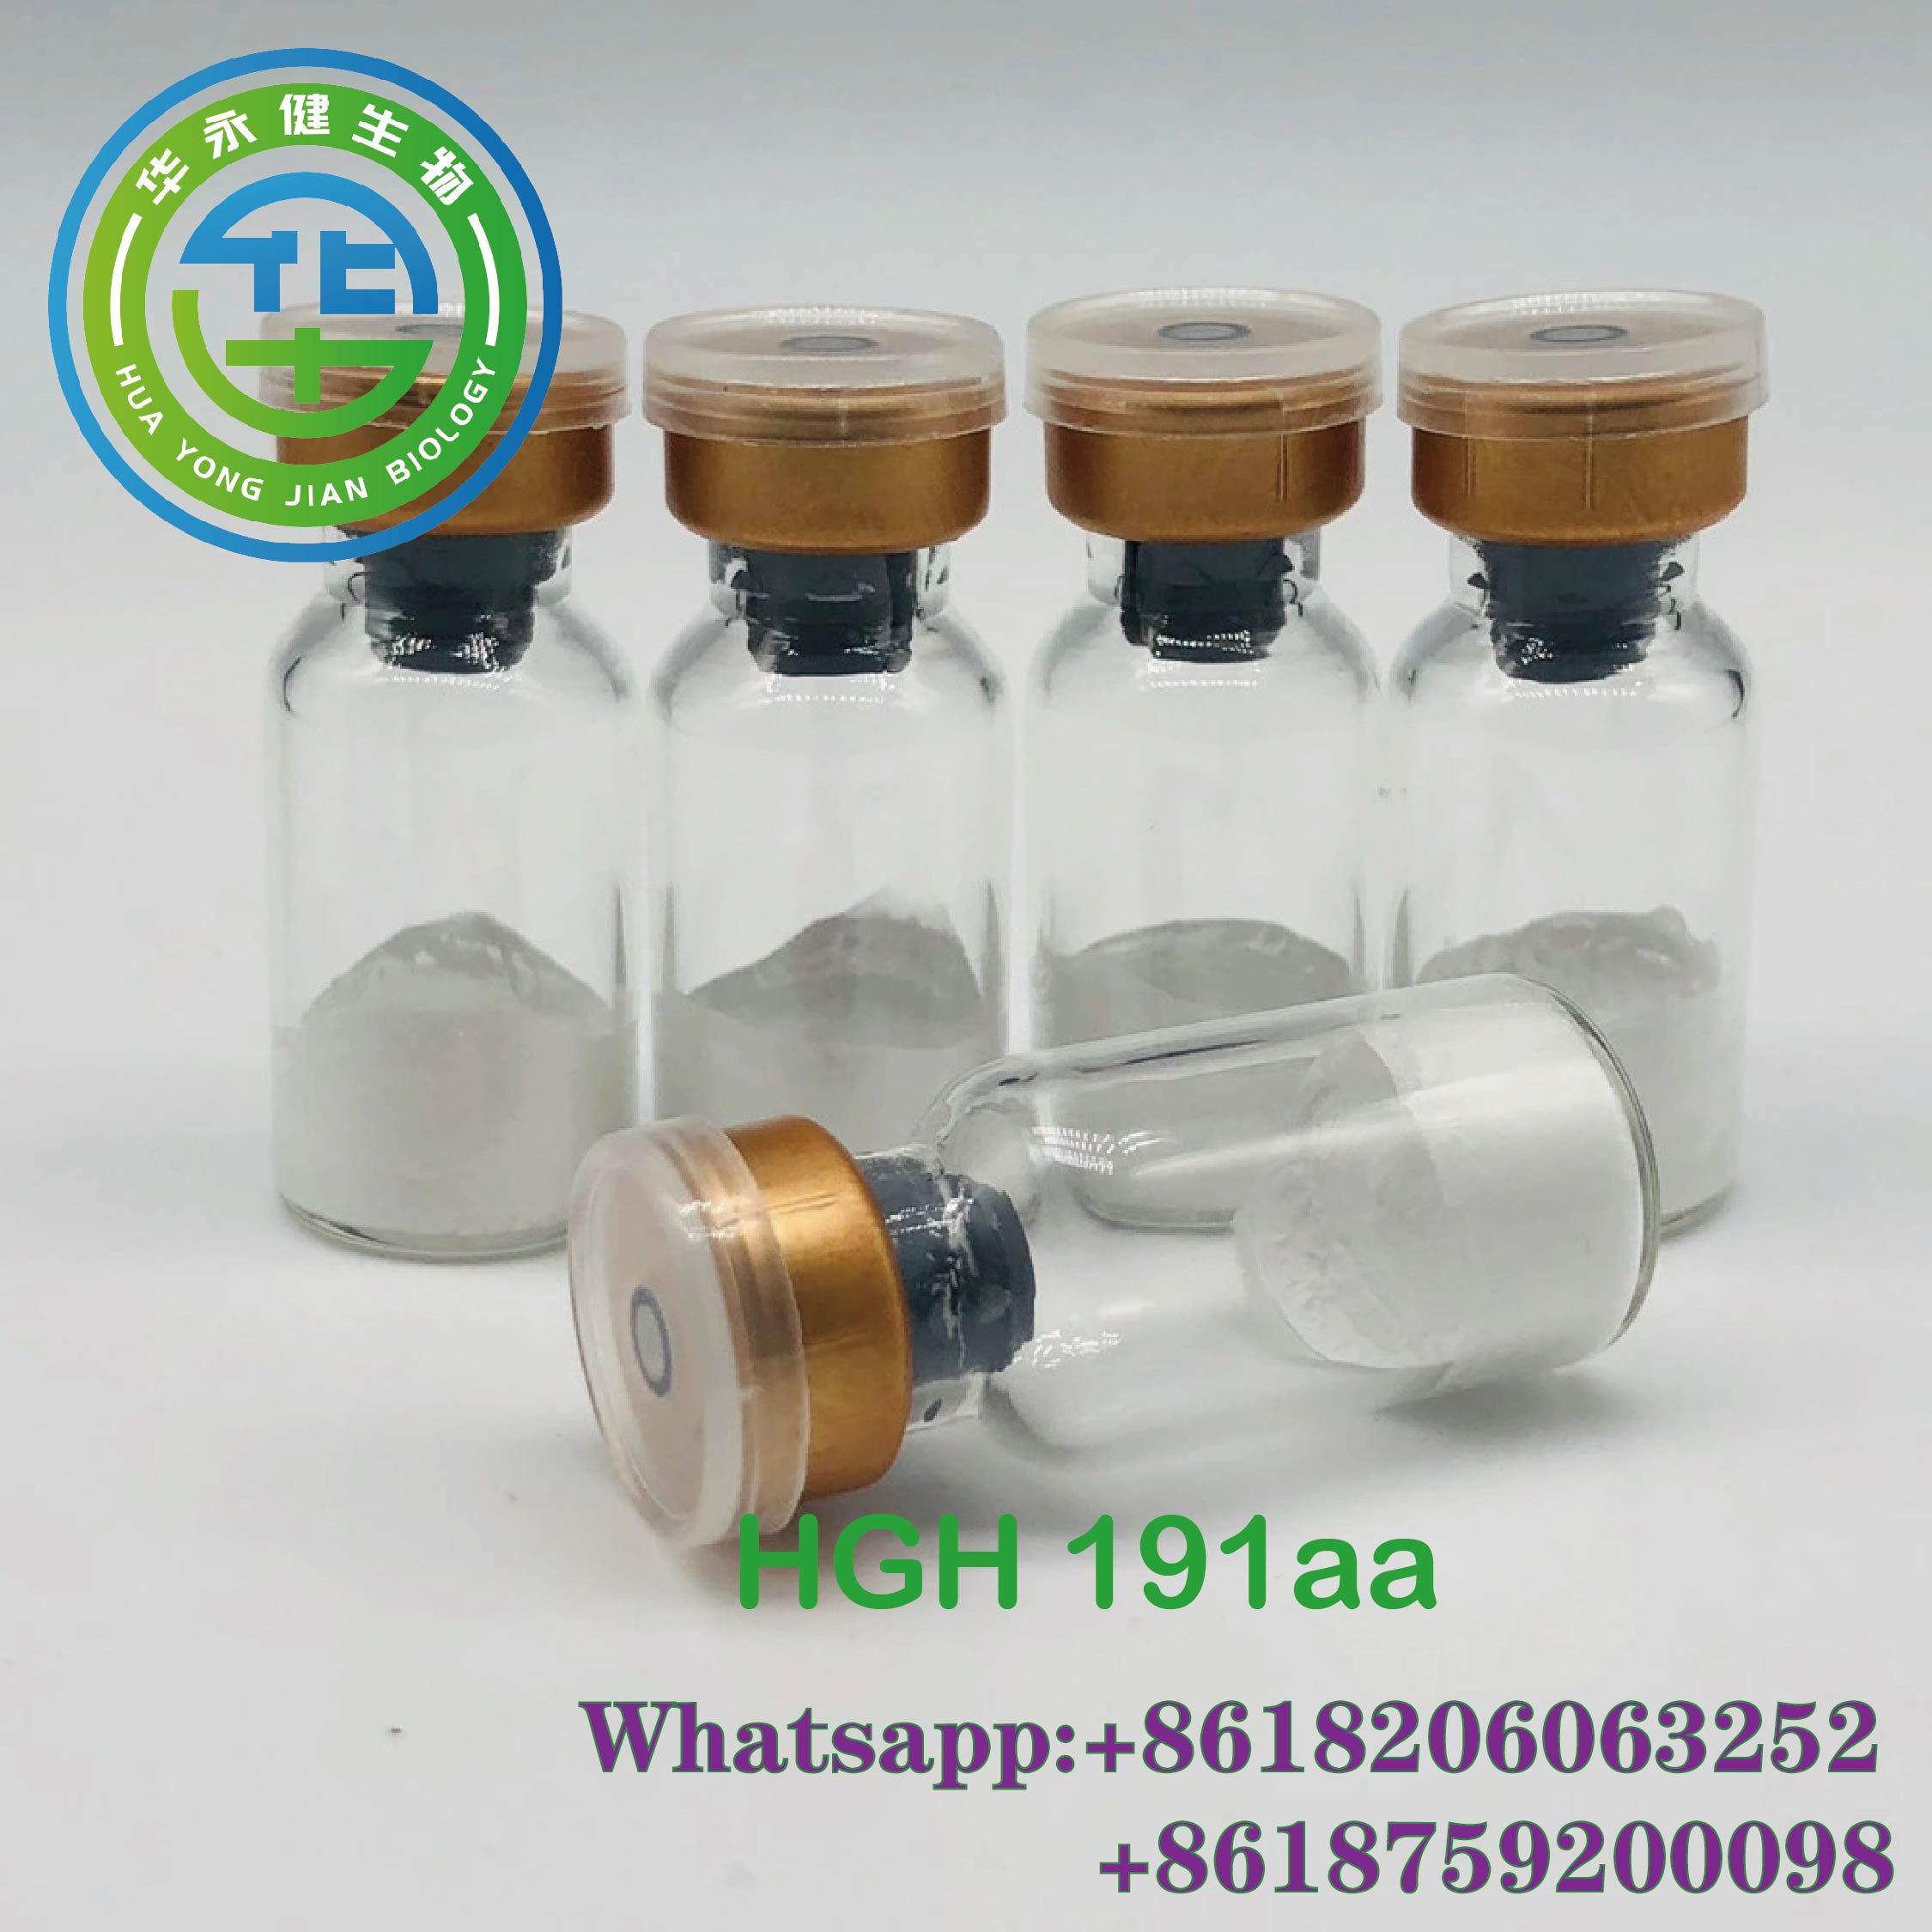 Human Growth Hormone Peptide 100iu Blue top grade with Blood Test Result Report HGH 191AA 